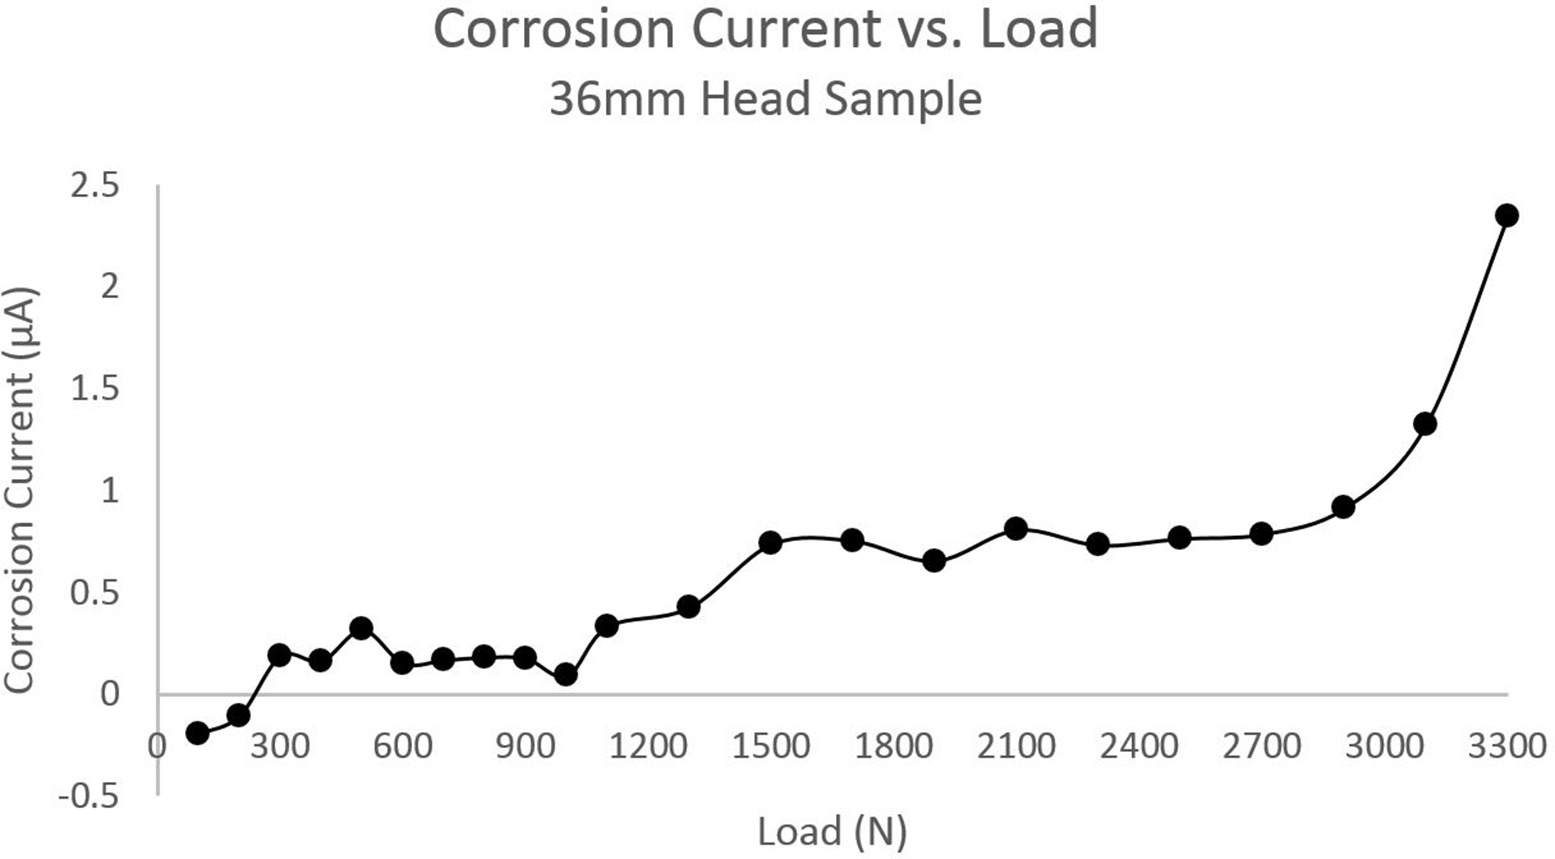 Fig. 7 
          Typical corrosion current vs. load plot for the incremental load test. This sample demonstrates a corrosion onset load of 1,500 N due to a marked increase in current compared to the baseline at lower loads.
        